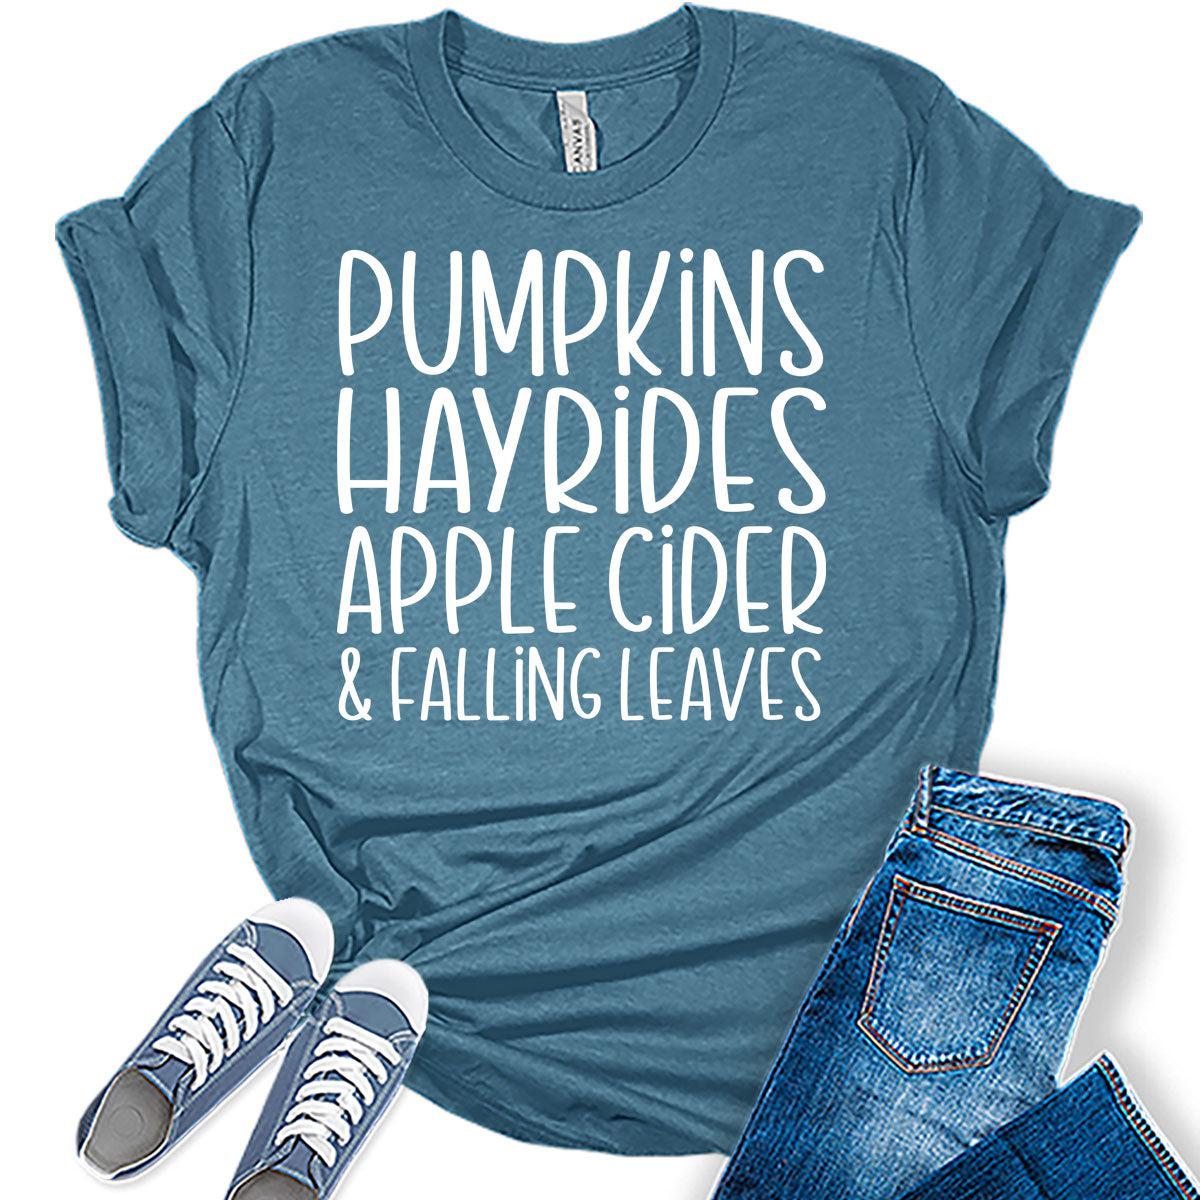 Pumpkins Hayrides Apple Cider and Falling Leaves T-Shirt Womens Fall Shirts Tops Halloween Thanksgiving Bella Graphic Tees